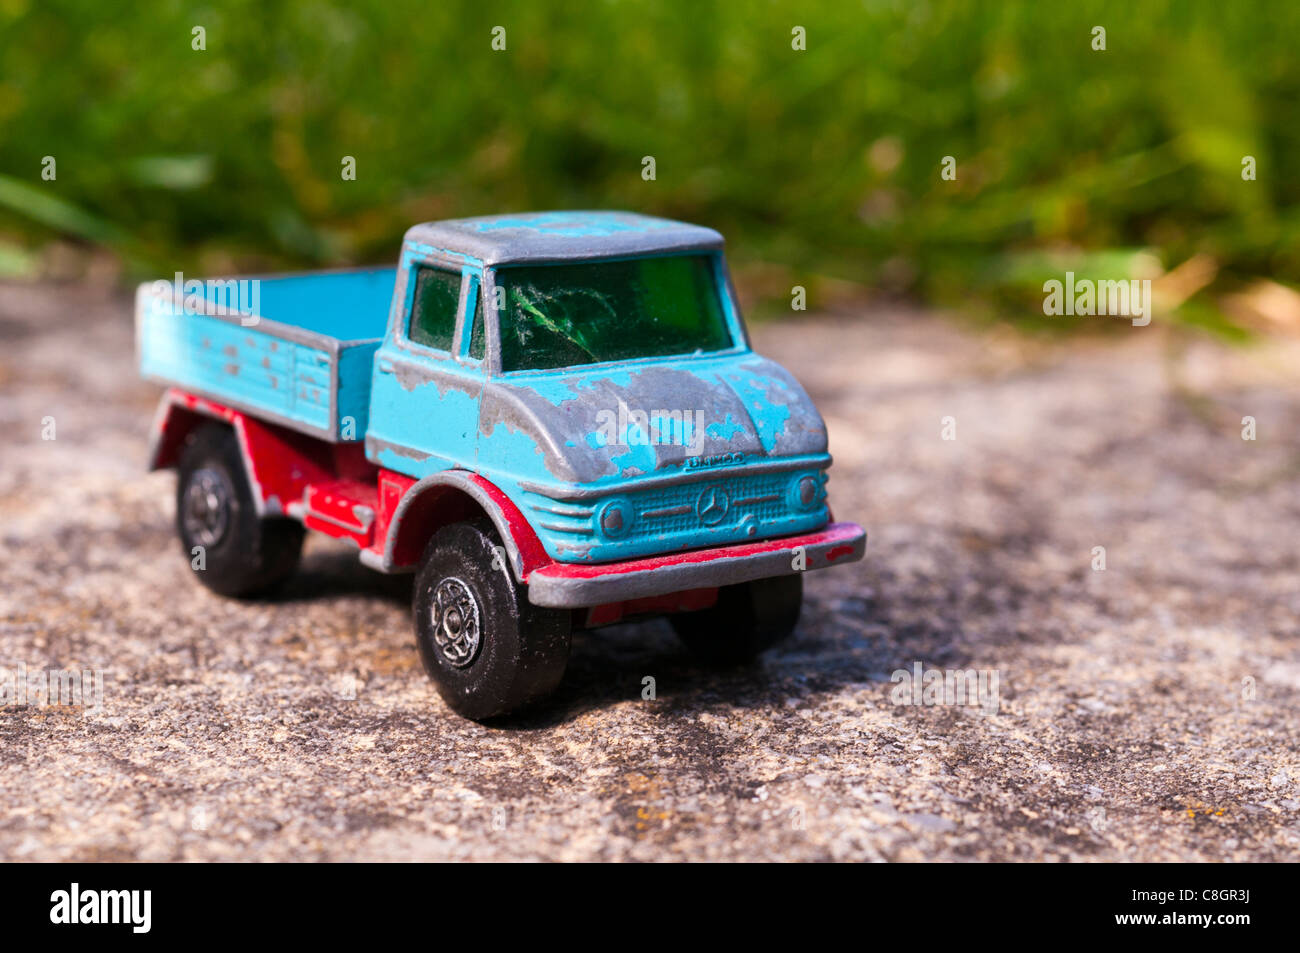 Toy Truck Lorry Stock Photos Toy Truck Lorry Stock 